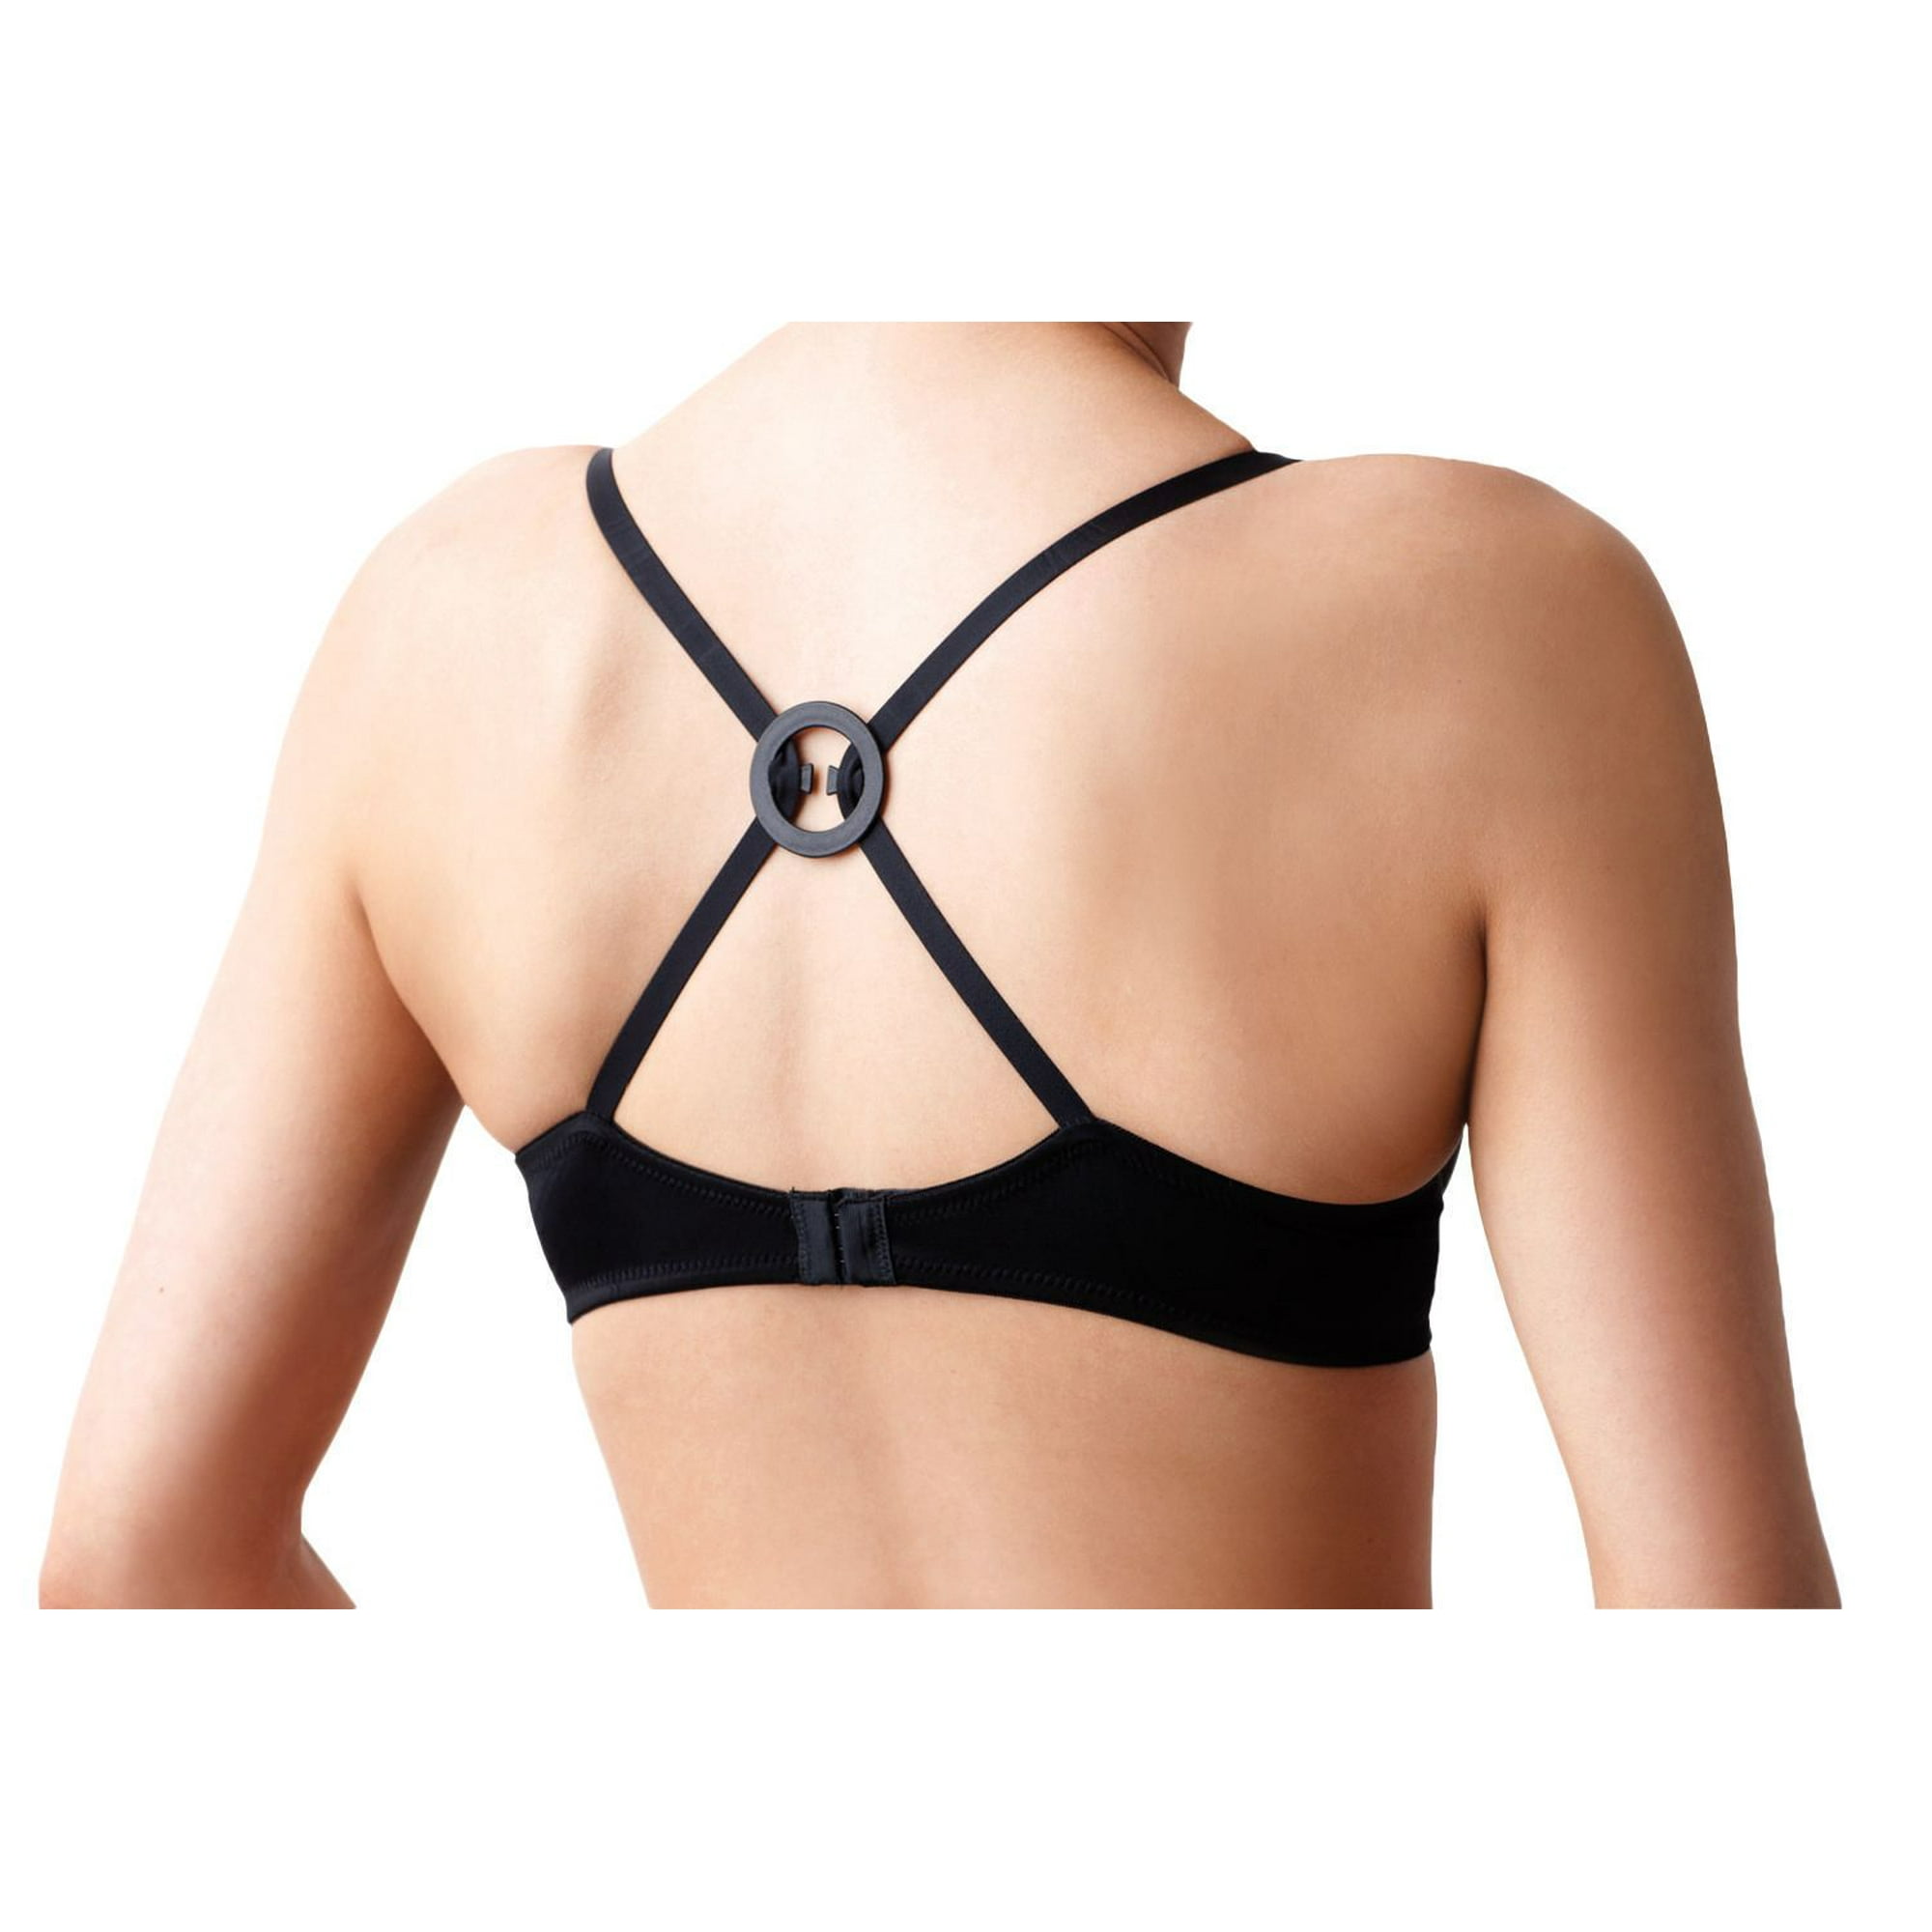 Wholesale bra strap clip holder For All Your Intimate Needs